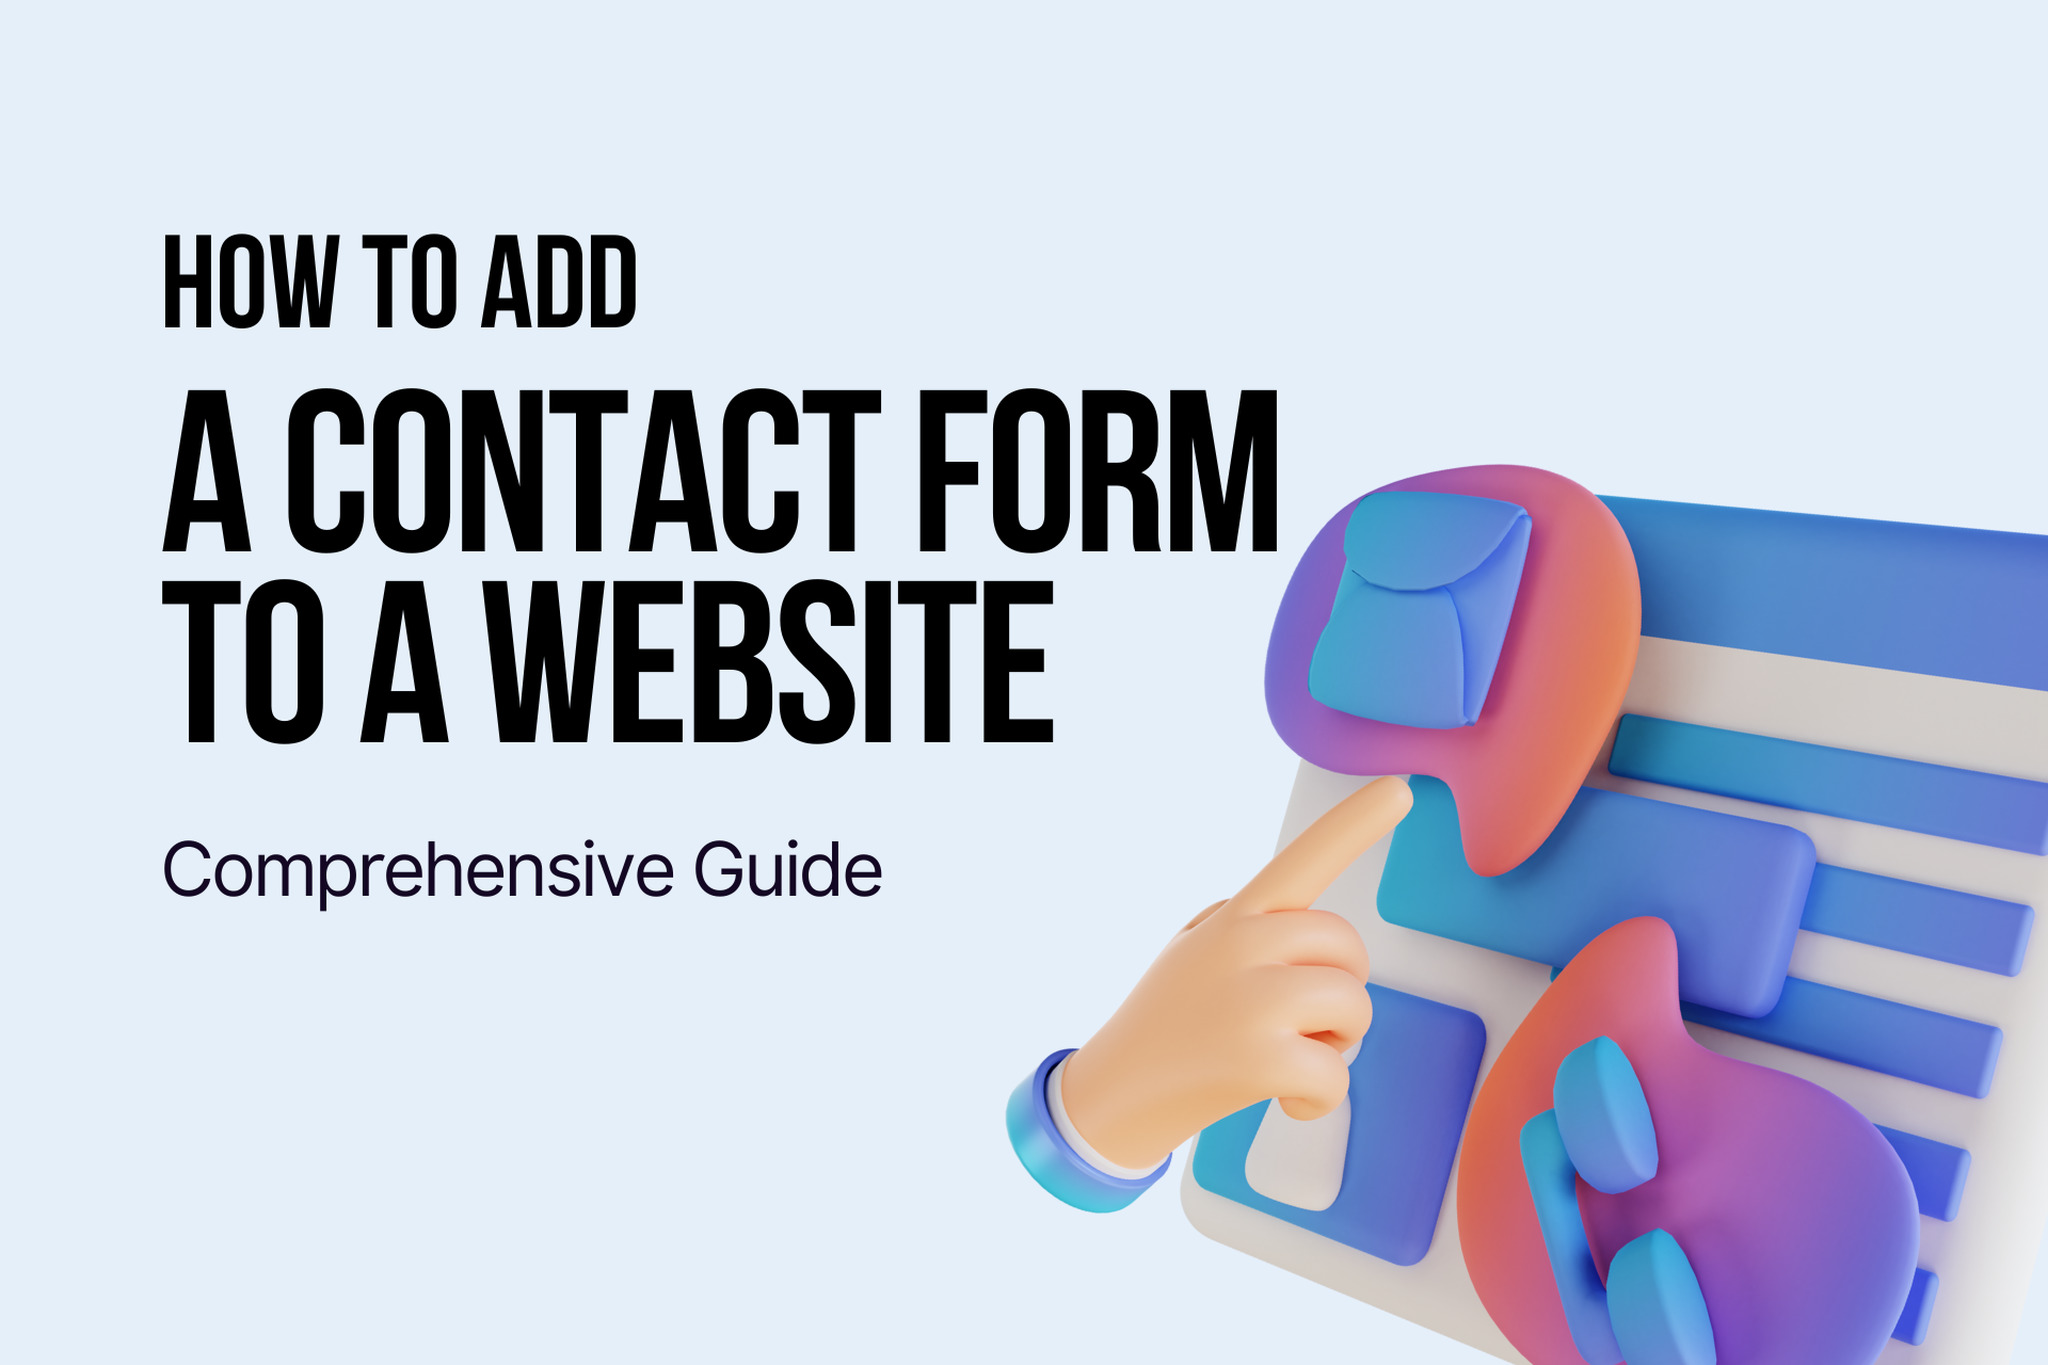 How to Add a Contact Form to a Website: Comprehensive Guide